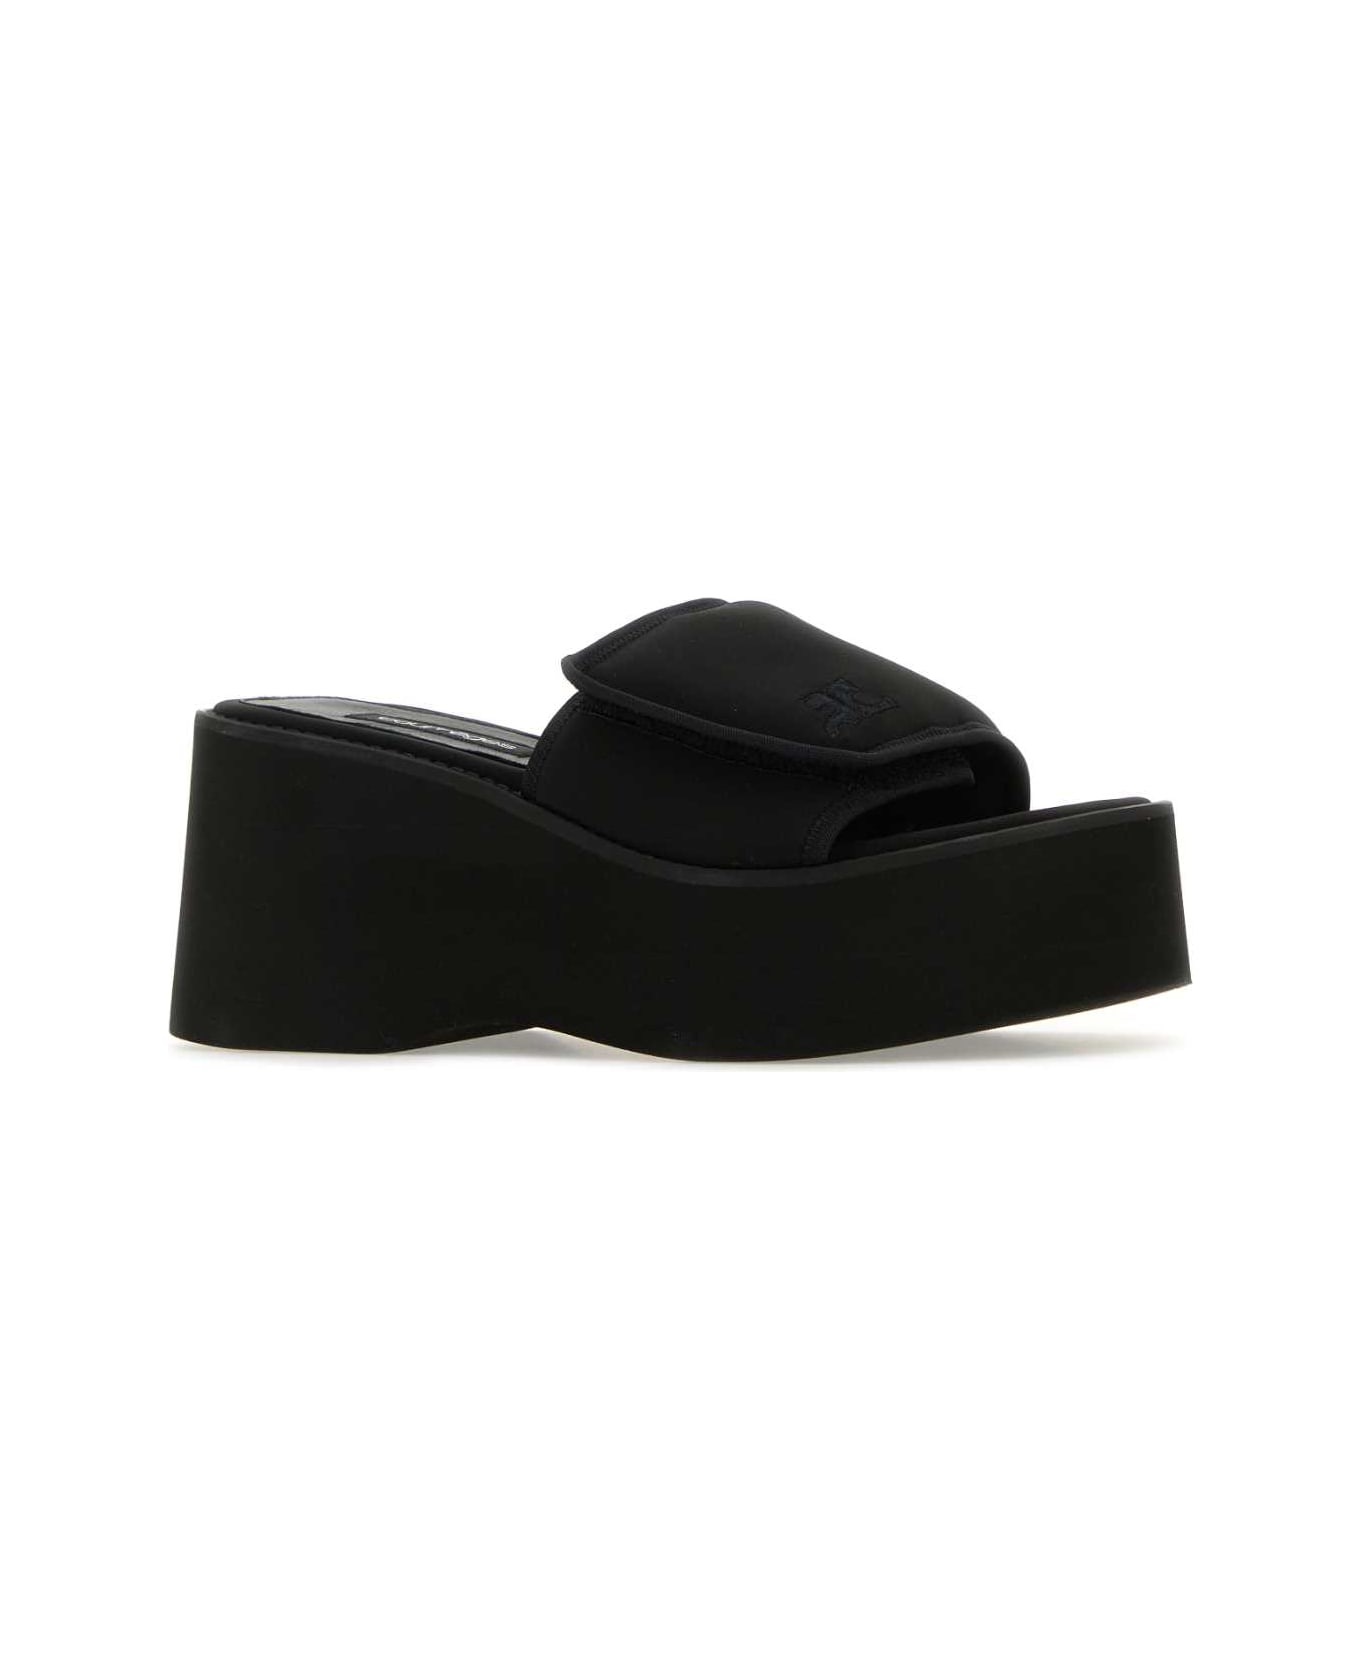 Courrèges Black Stretch Polyester Blend Scusa Wave Slippers - Black サンダル